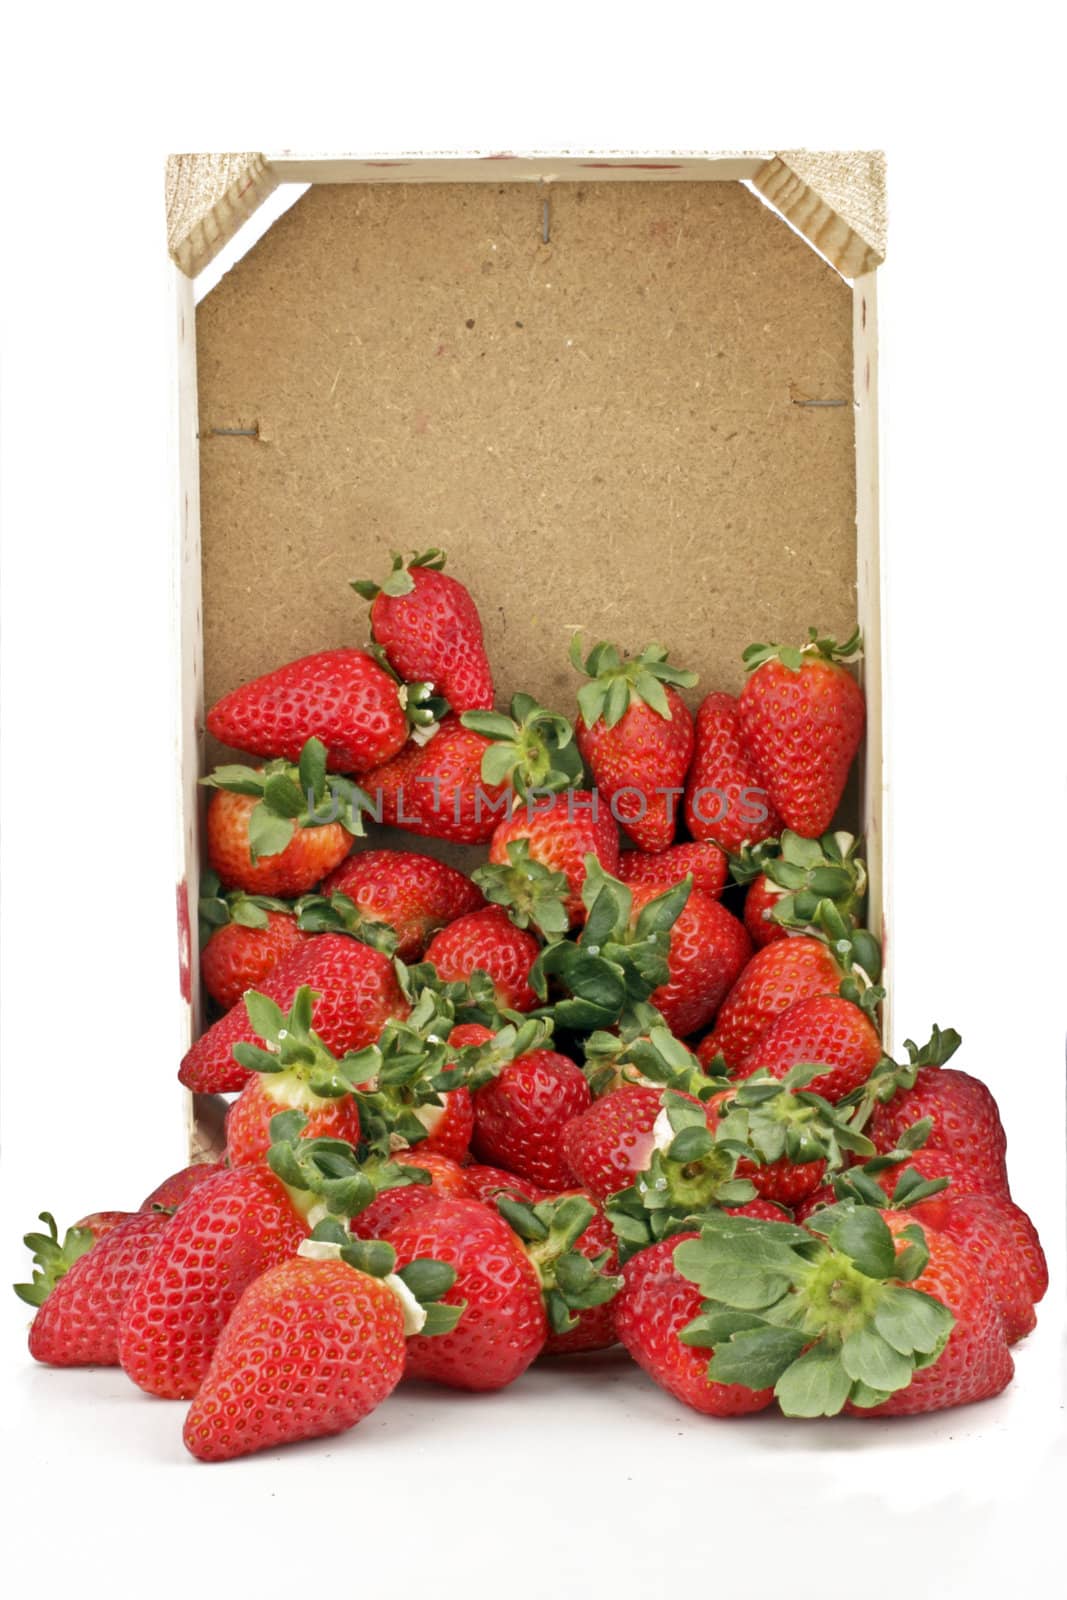 Bpx with strawberries on a white background